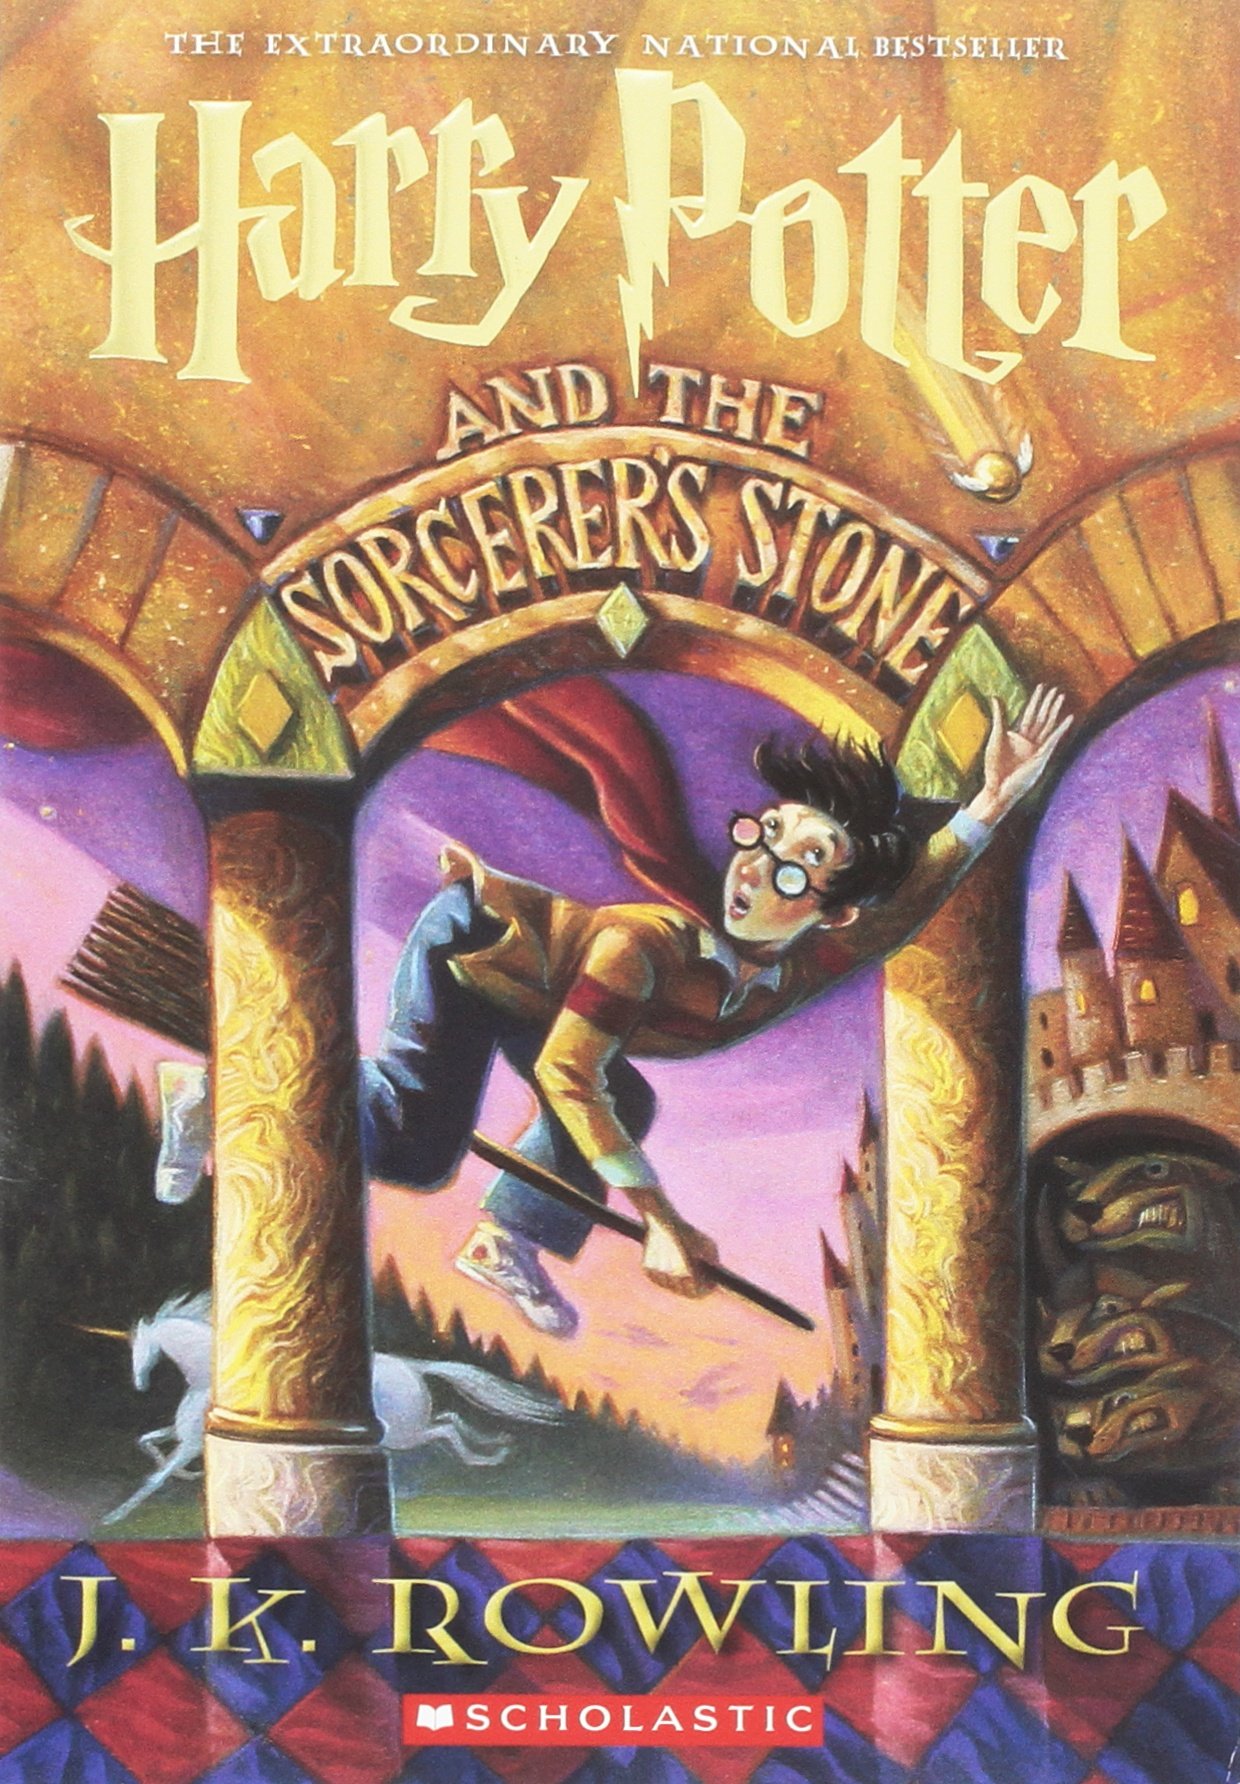 Harry Potter and the Sorcerer's Stone books i'm thankful for